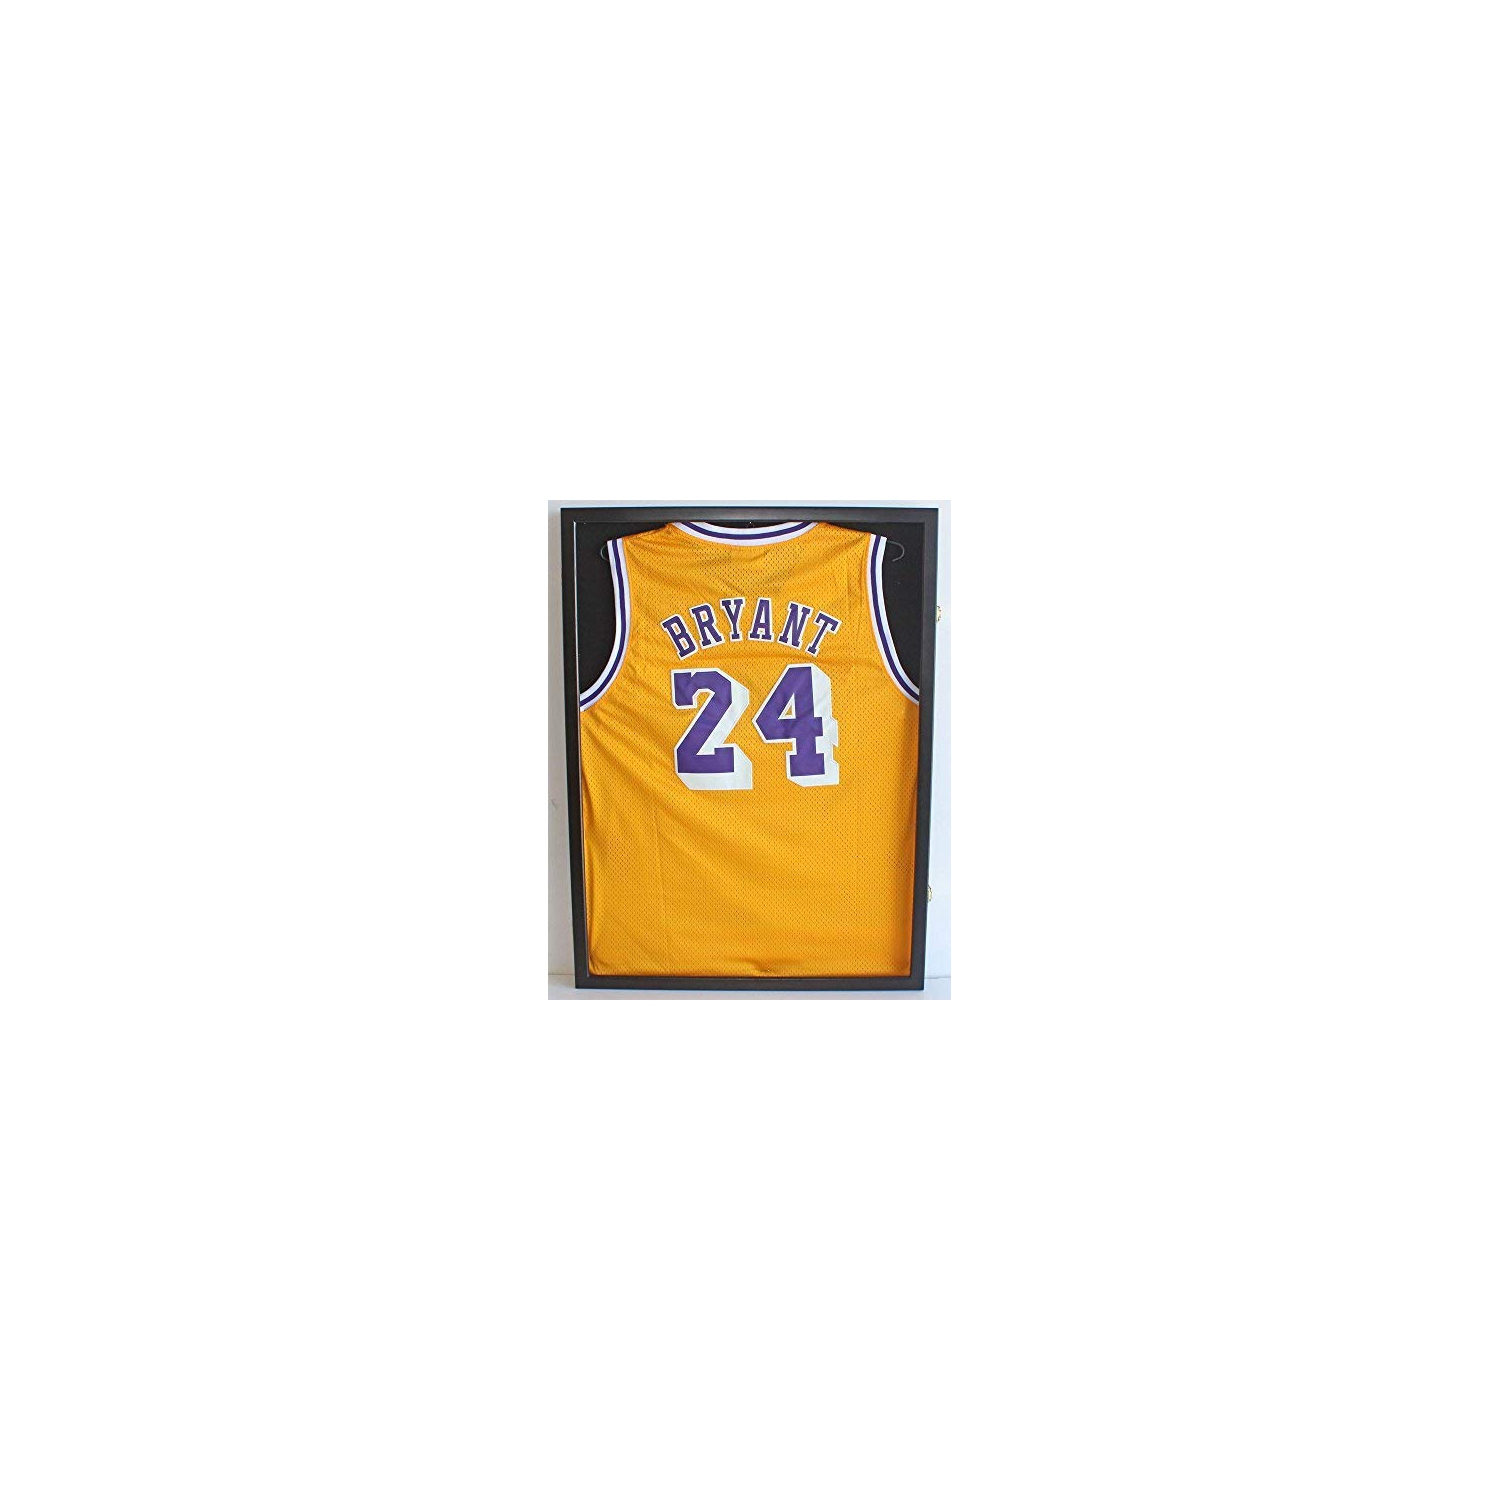 Jersey Display Frame Case 31" X 23" Frames Shadow Box Lockable with UV Protection Acrylic Hanger and Wall Mount Option for Baseball Basketball Football Soccer Hockey Sport Shirt